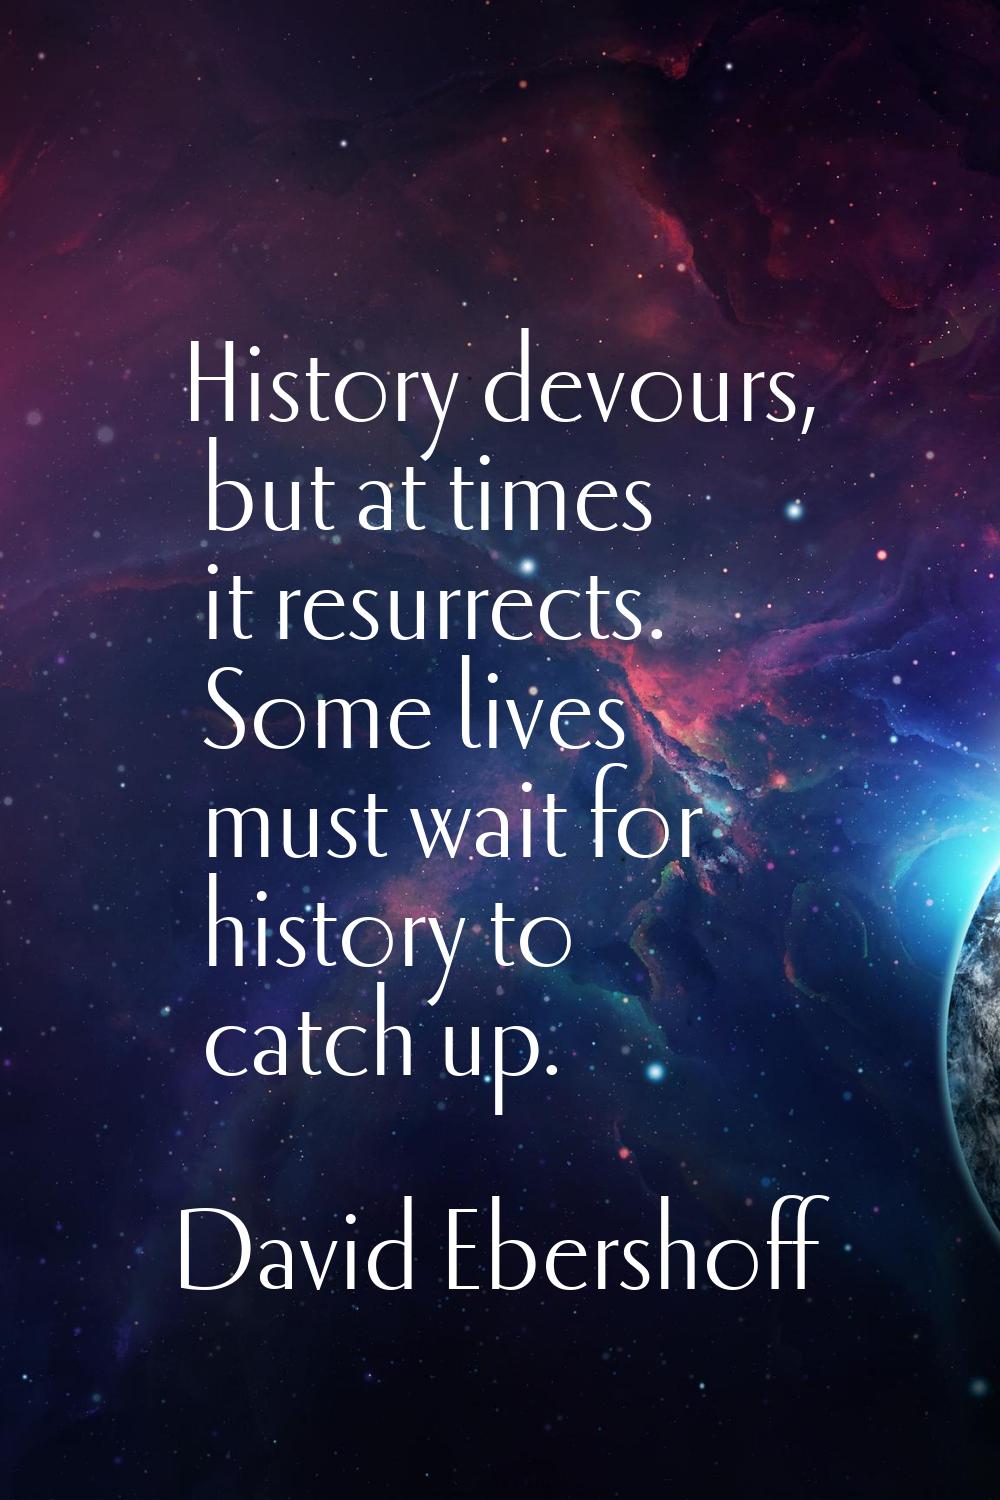 History devours, but at times it resurrects. Some lives must wait for history to catch up.